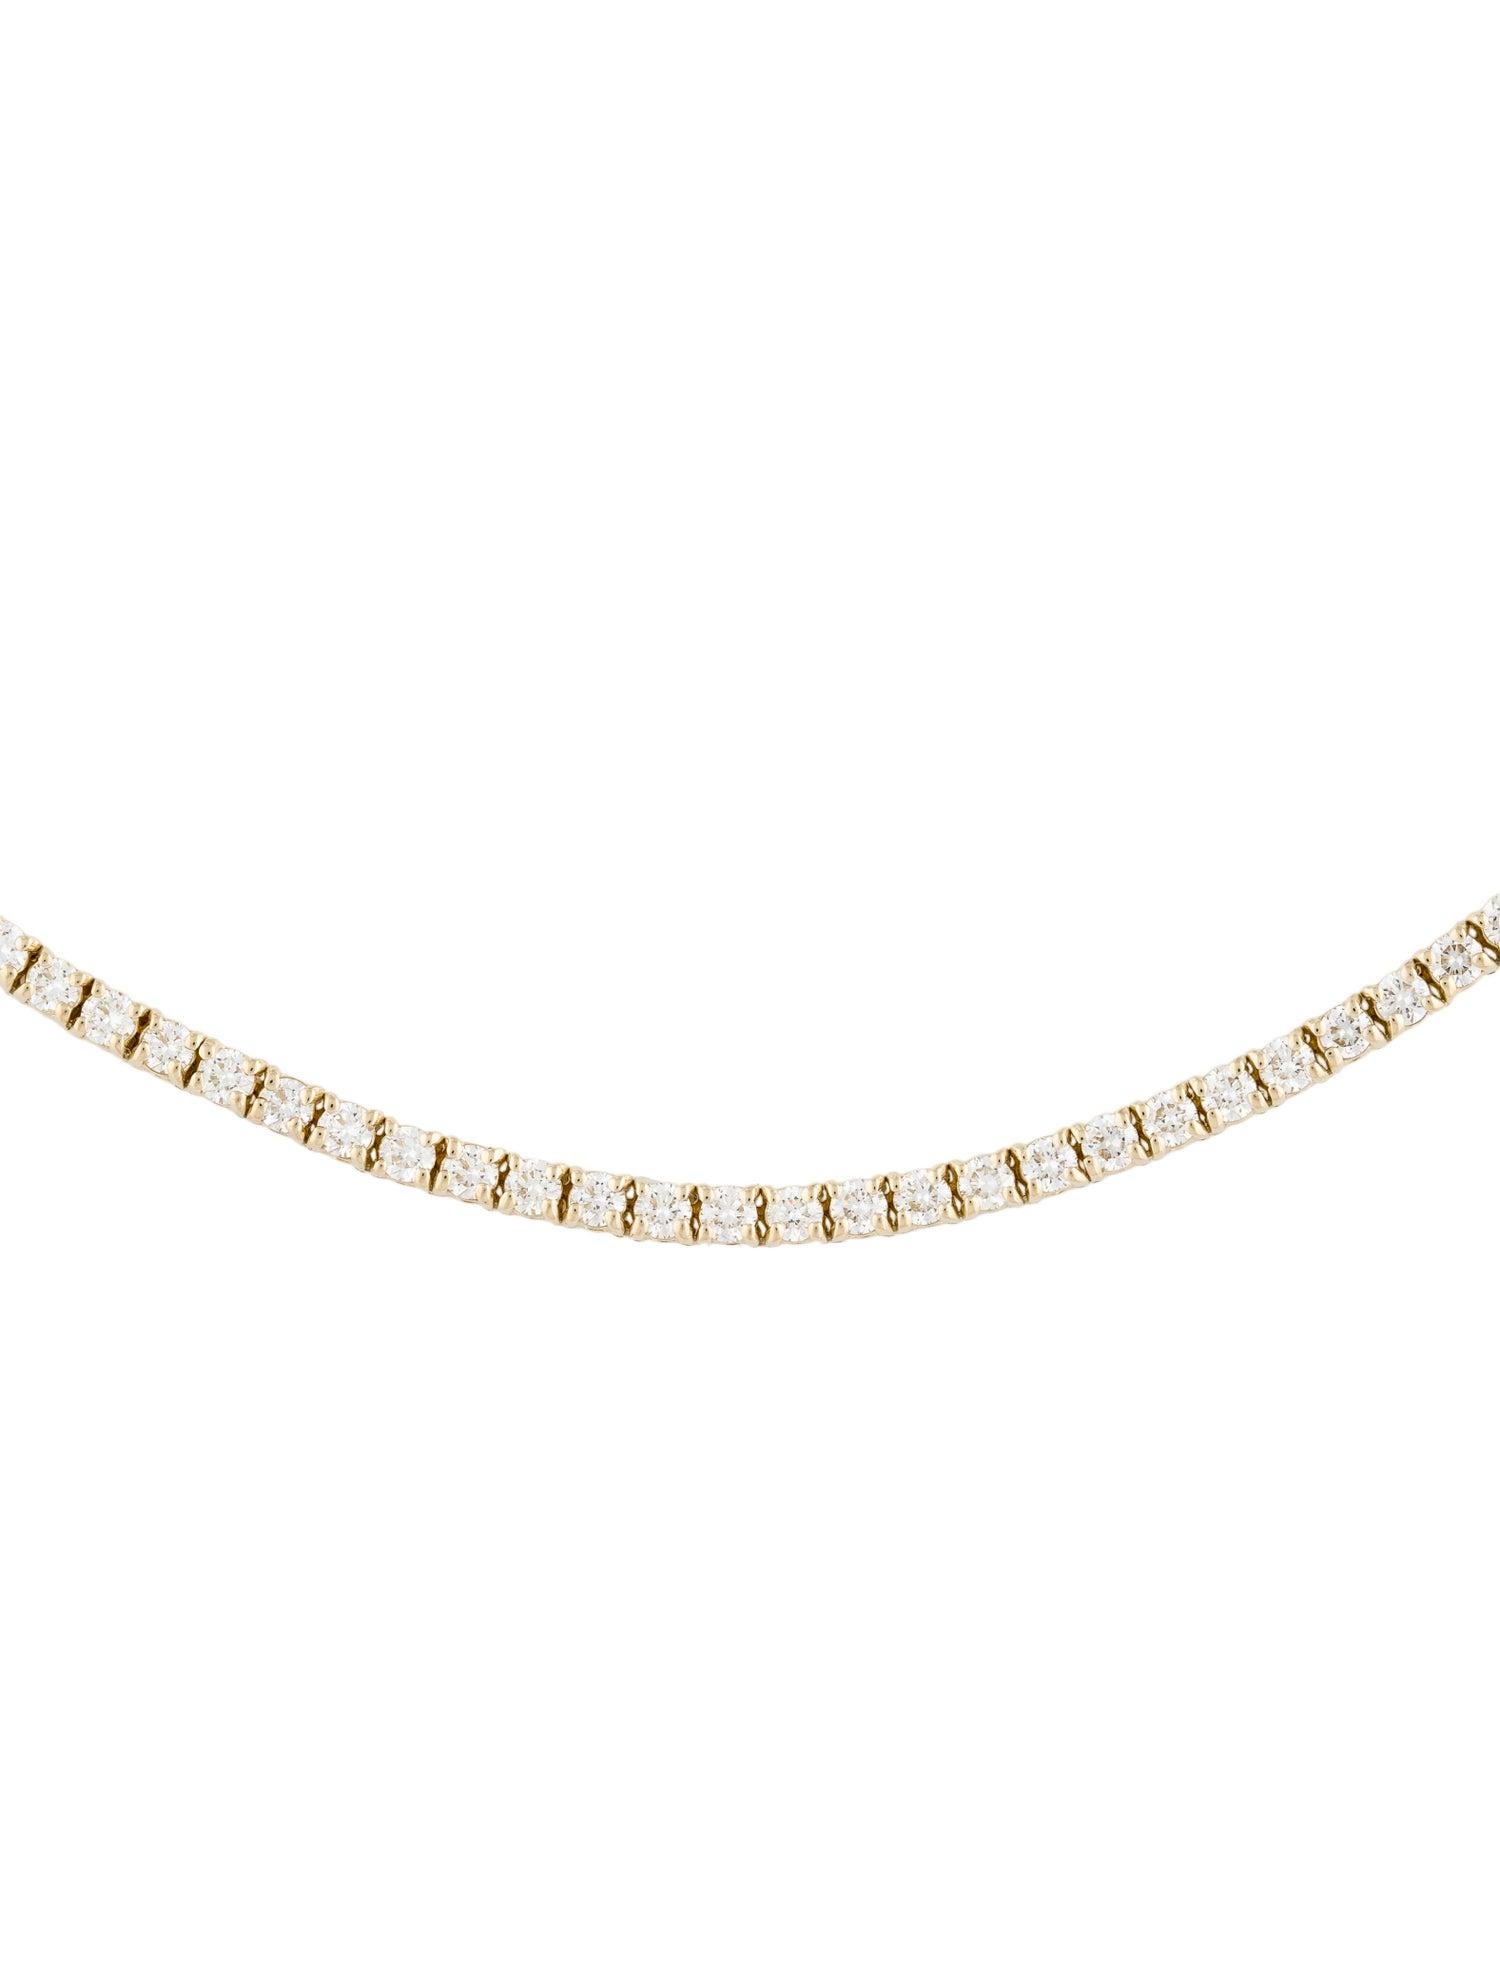 This Classic, Elegant and Beautiful Diamond Necklace will make your look so Glamourous! Crafted of 14K Gold this necklace features 180 natural round white Diamonds weighing approximately 5.05 carats. Necklace measure 17